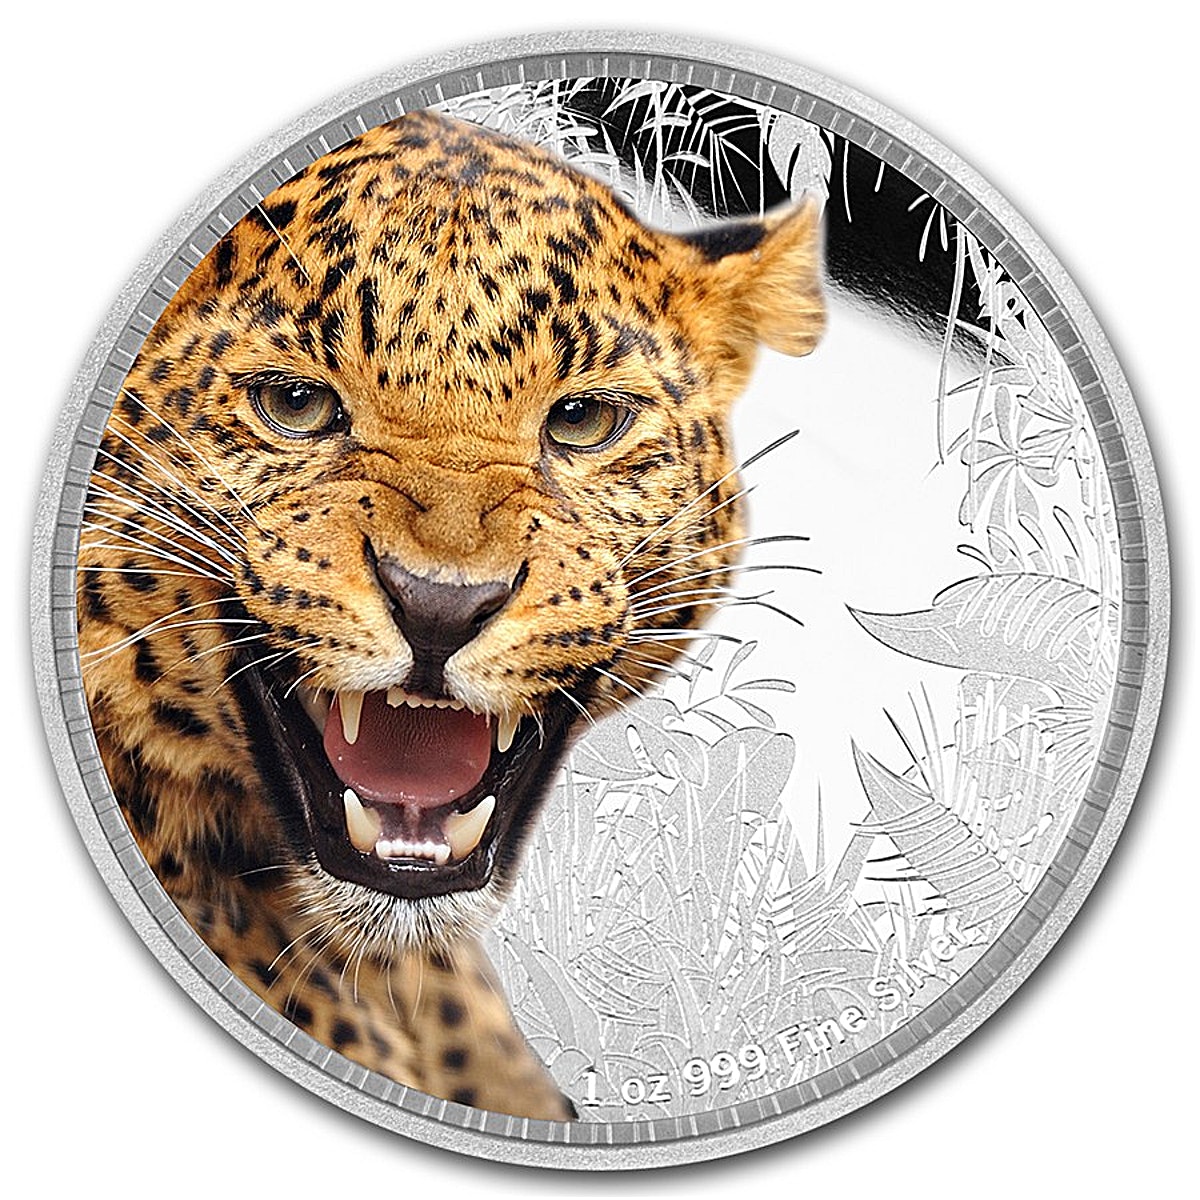 Kings Of The Continents 1 oz 2016 Niue Jaguar Silver Coin